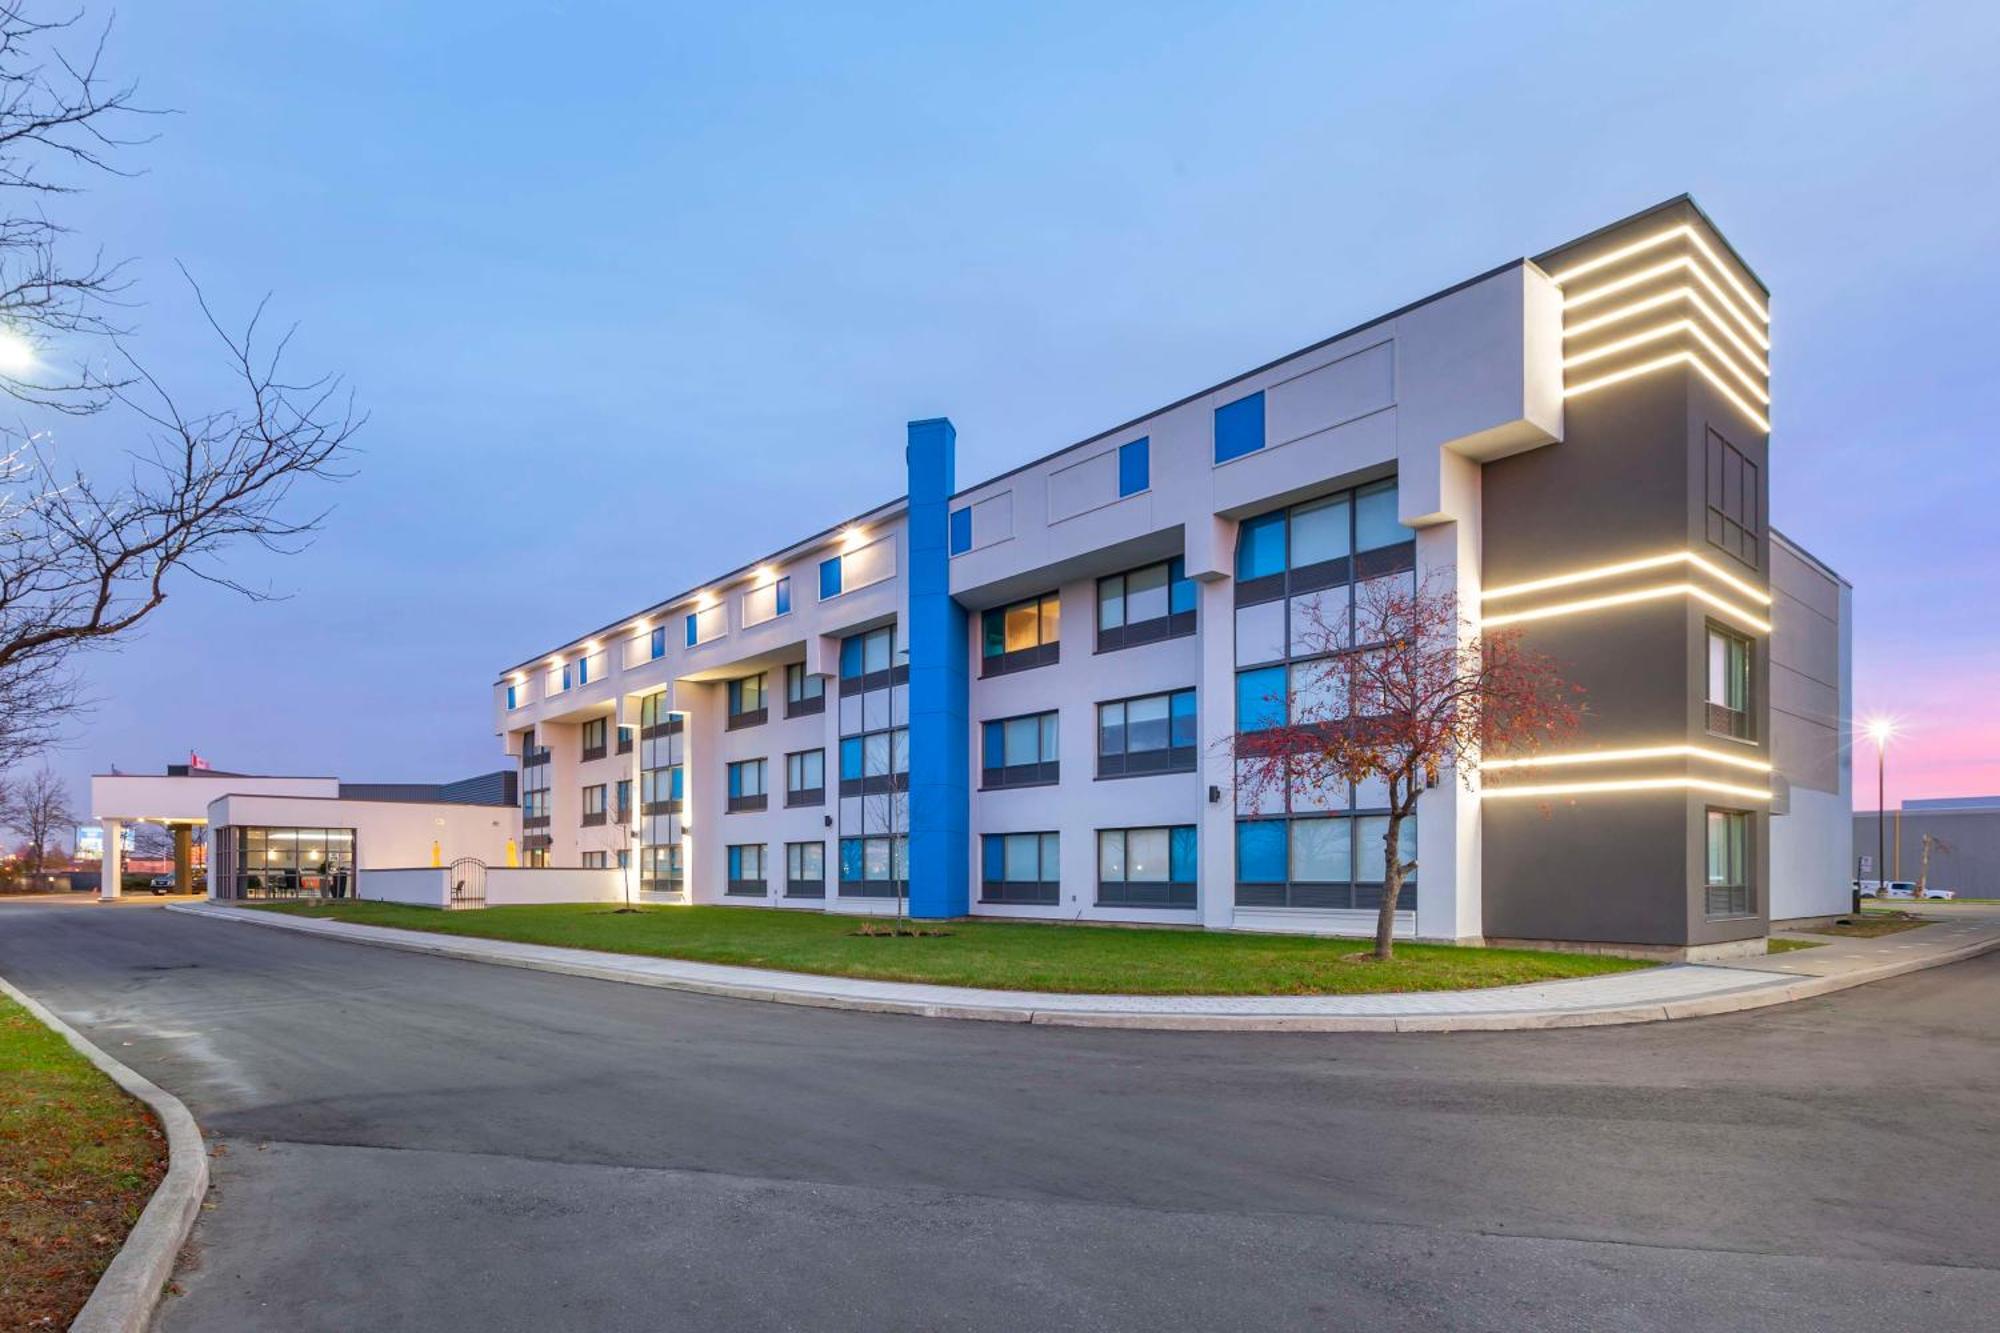 Glo Best Western Mississauga Corporate Centre Exterior photo